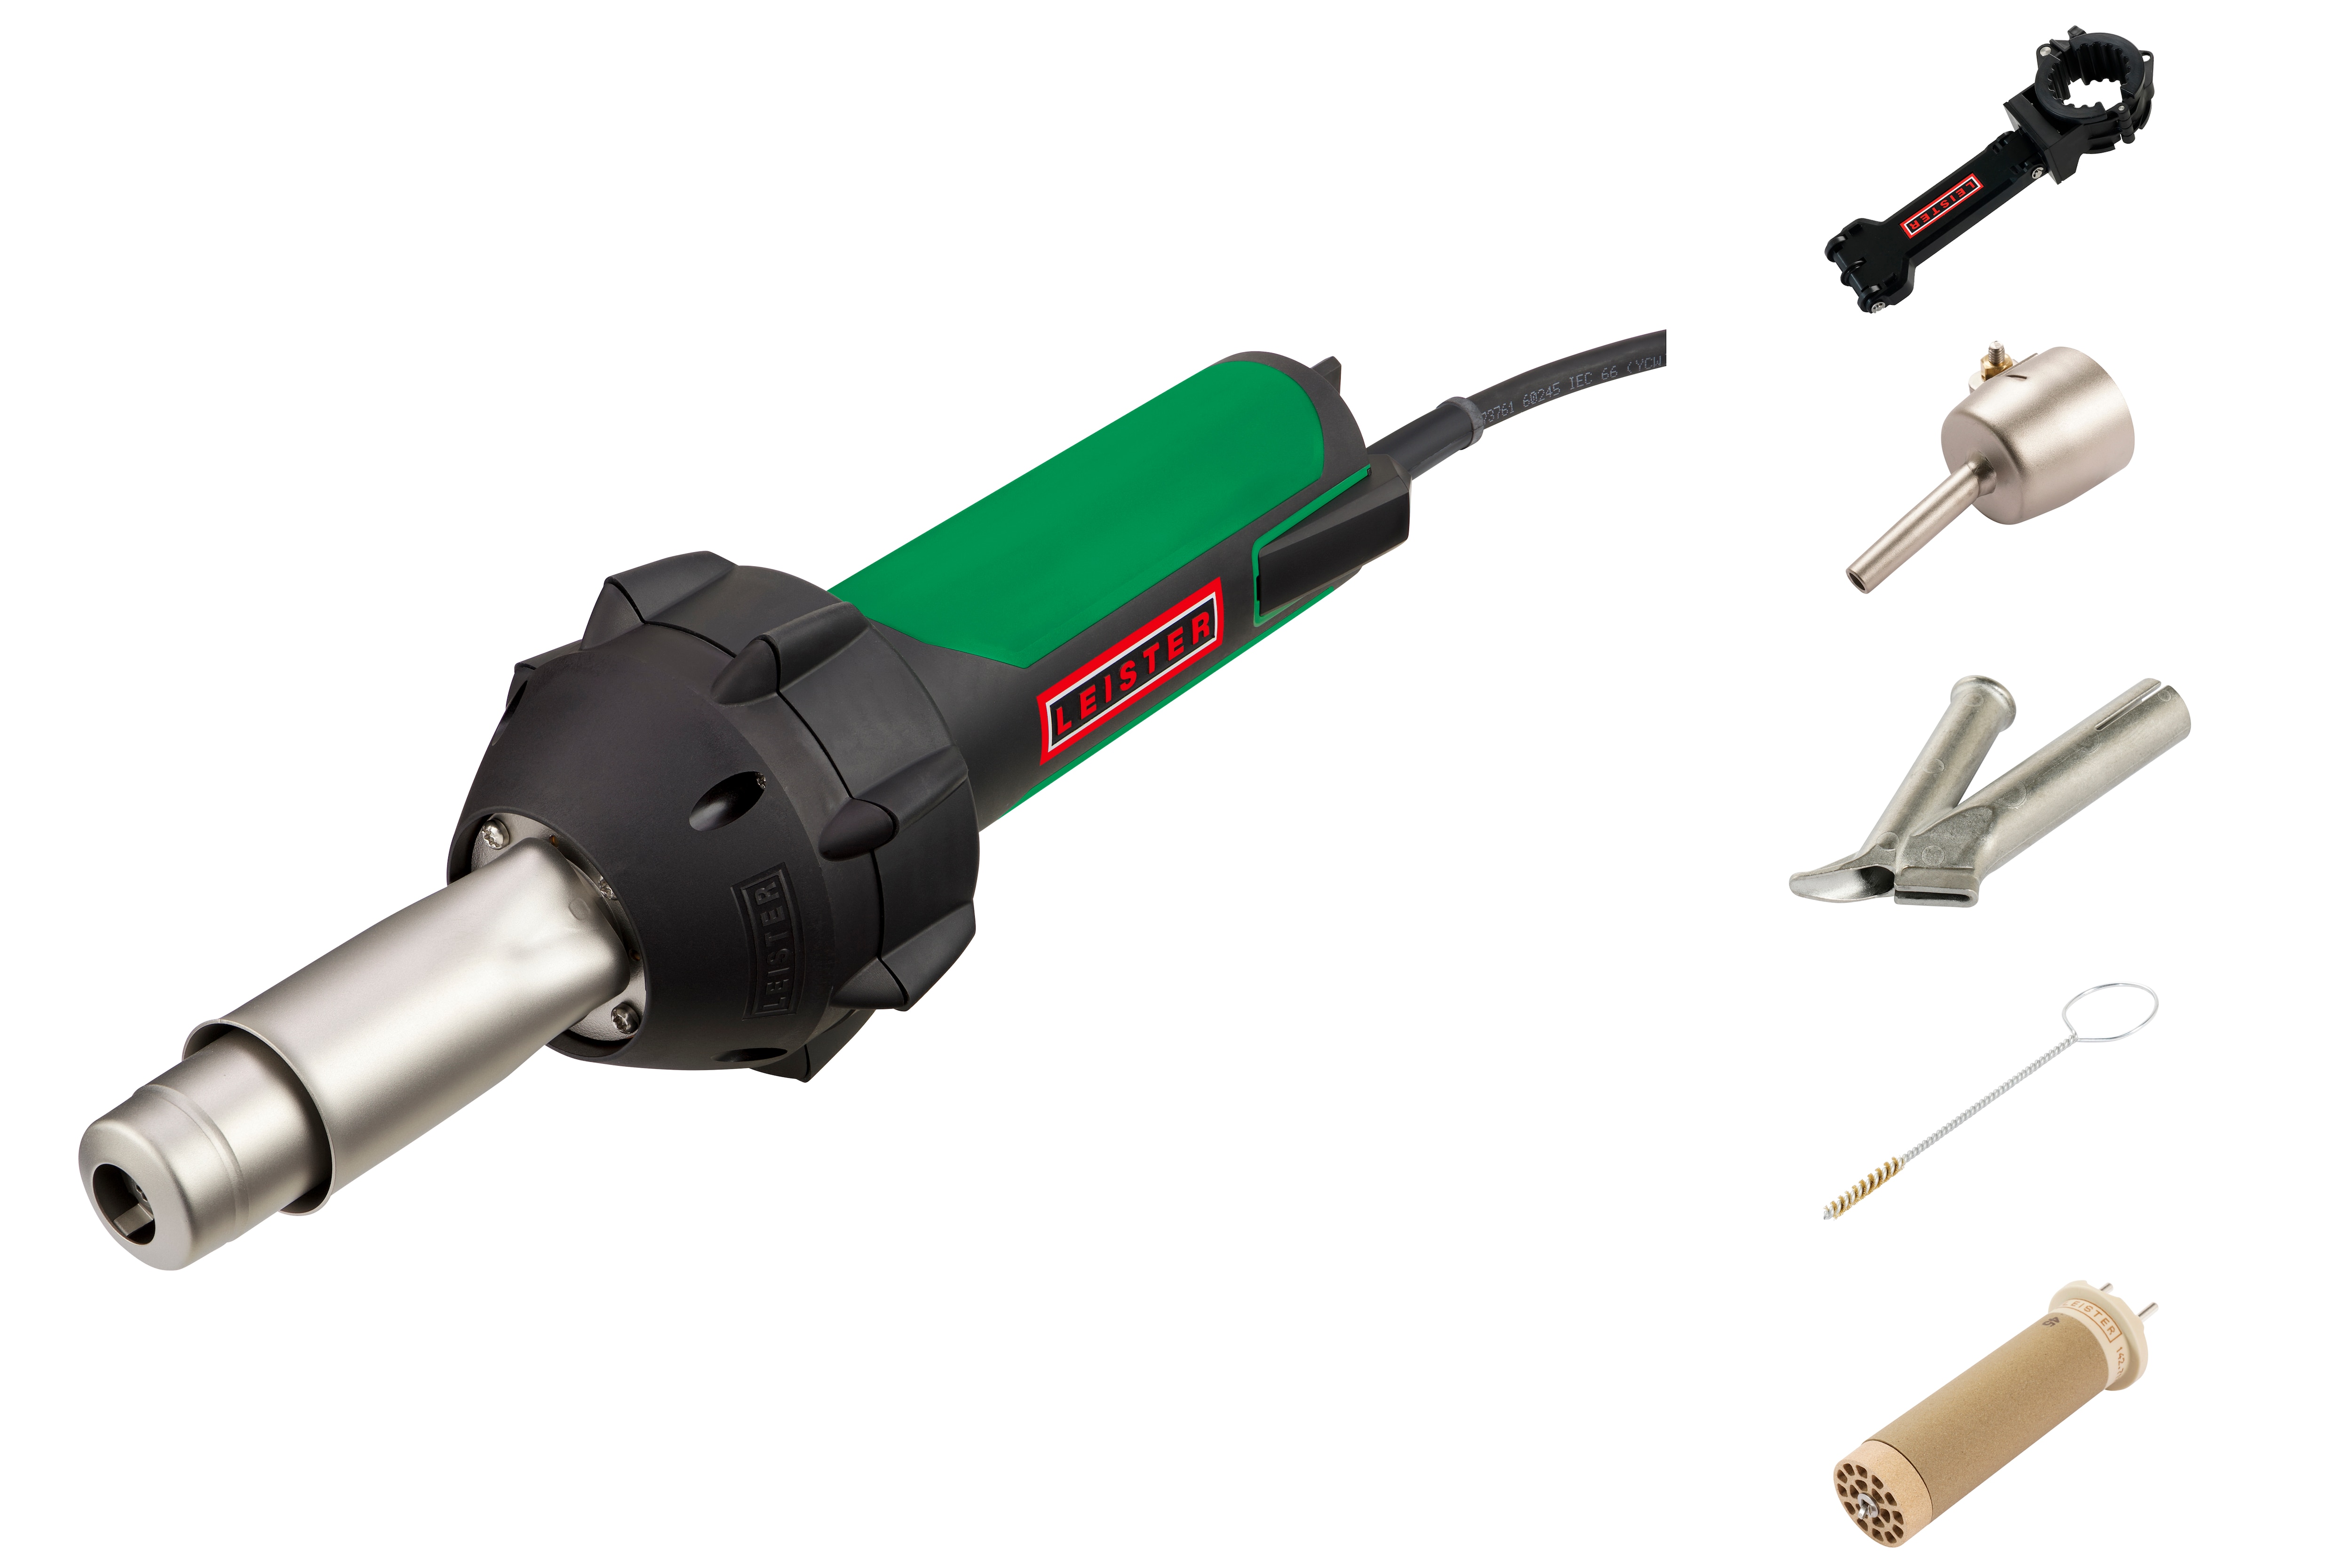 Heat Guns for Plastic Welding, Roofing and more